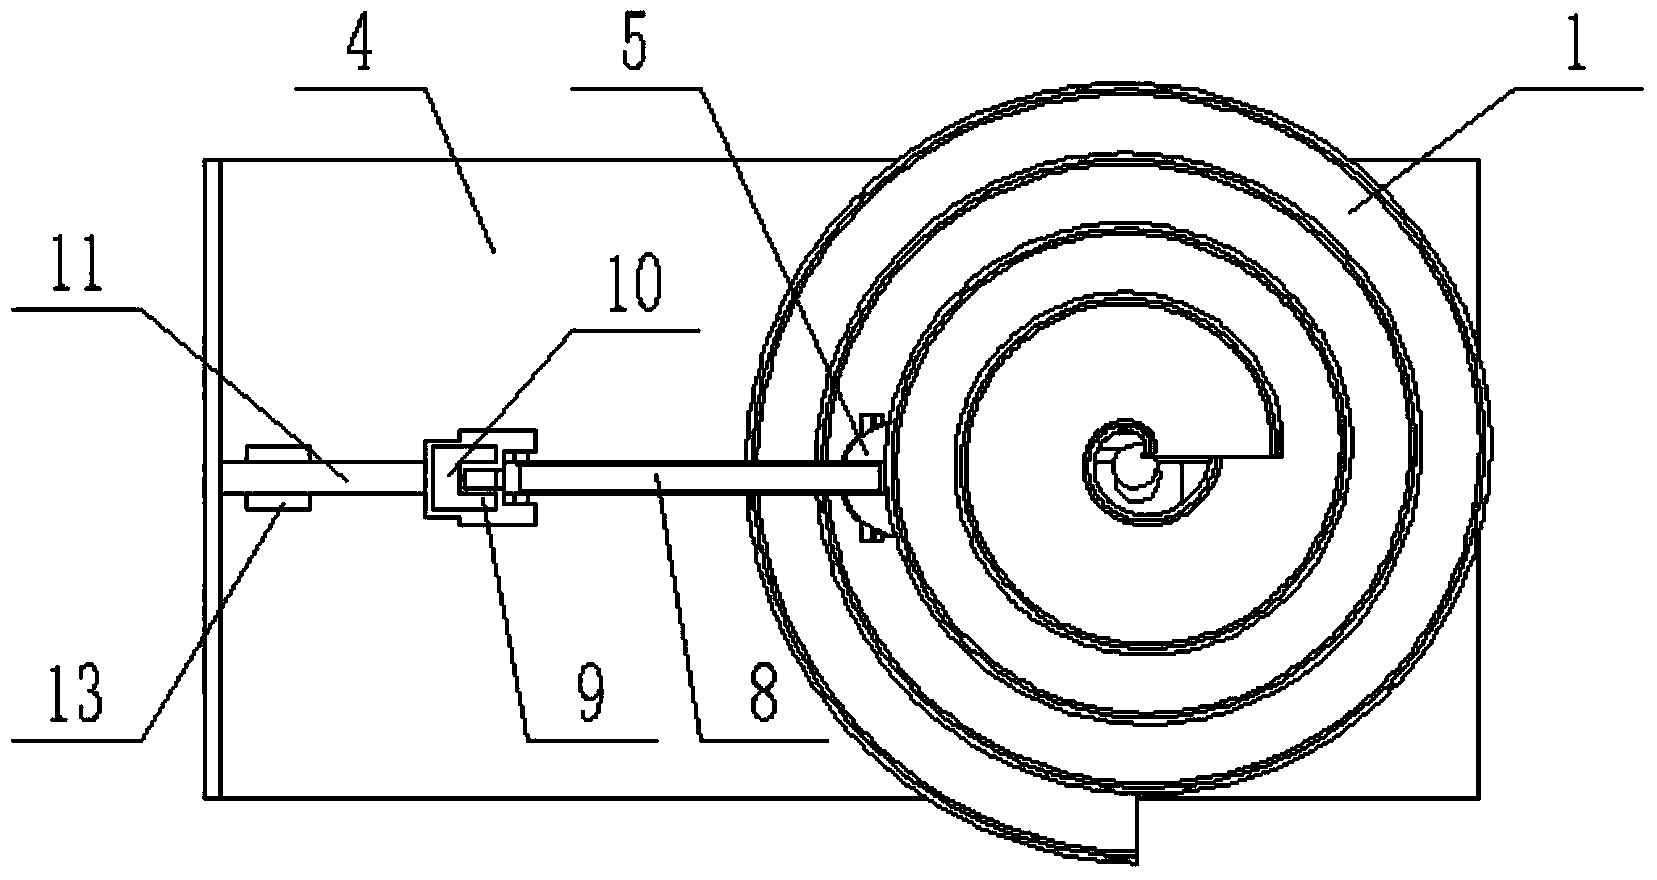 Cone spiral grinding device